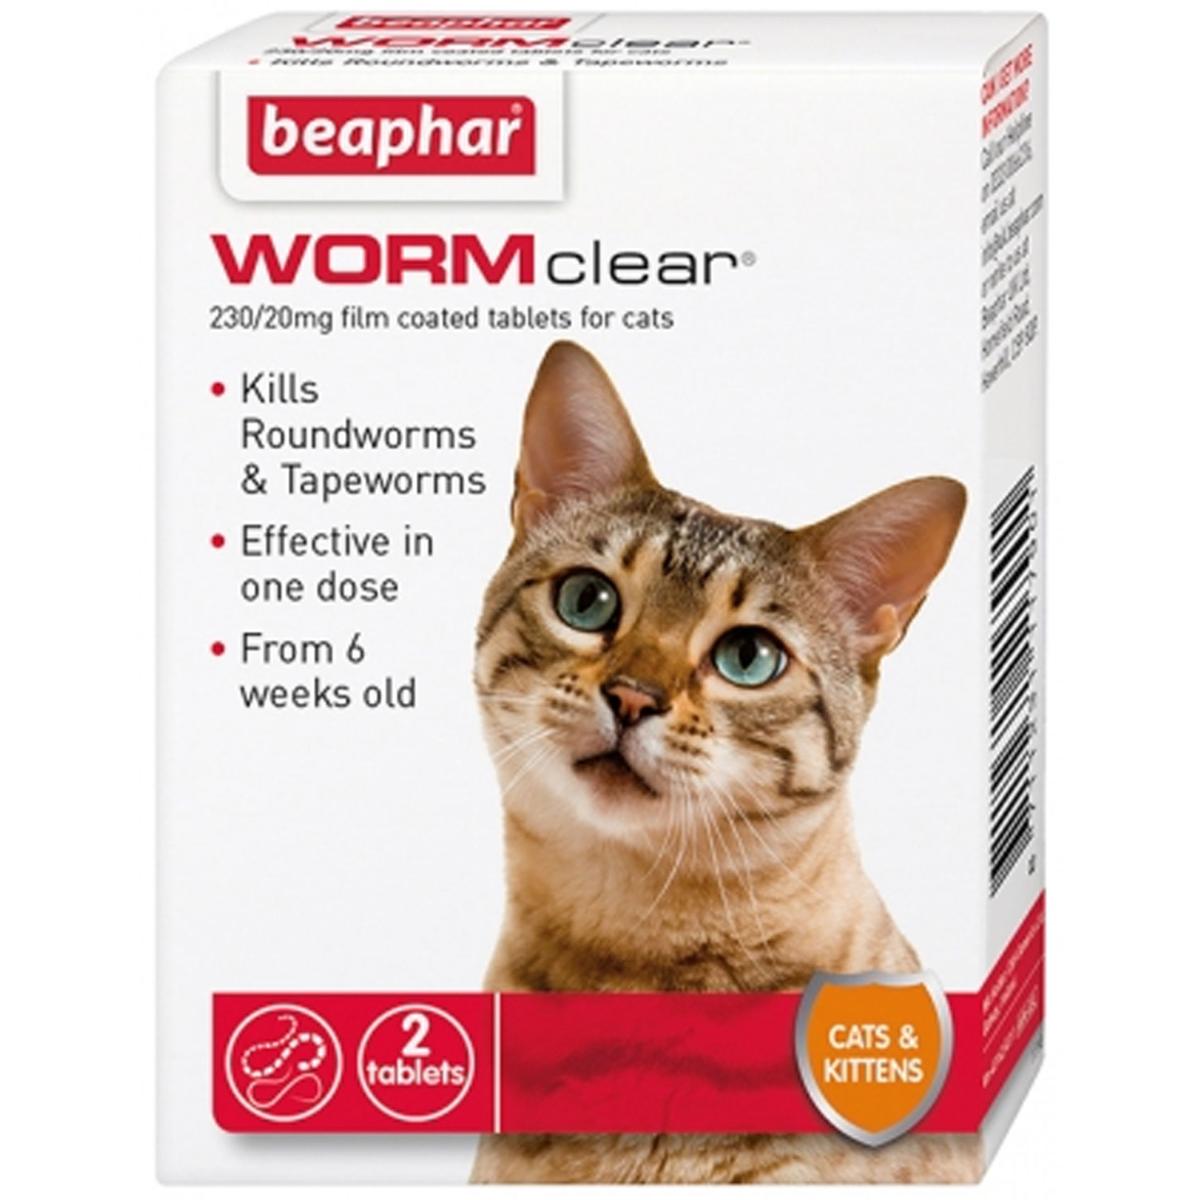 Cat Worming Tablets | Cat Worm Control | Beaphar WormClear